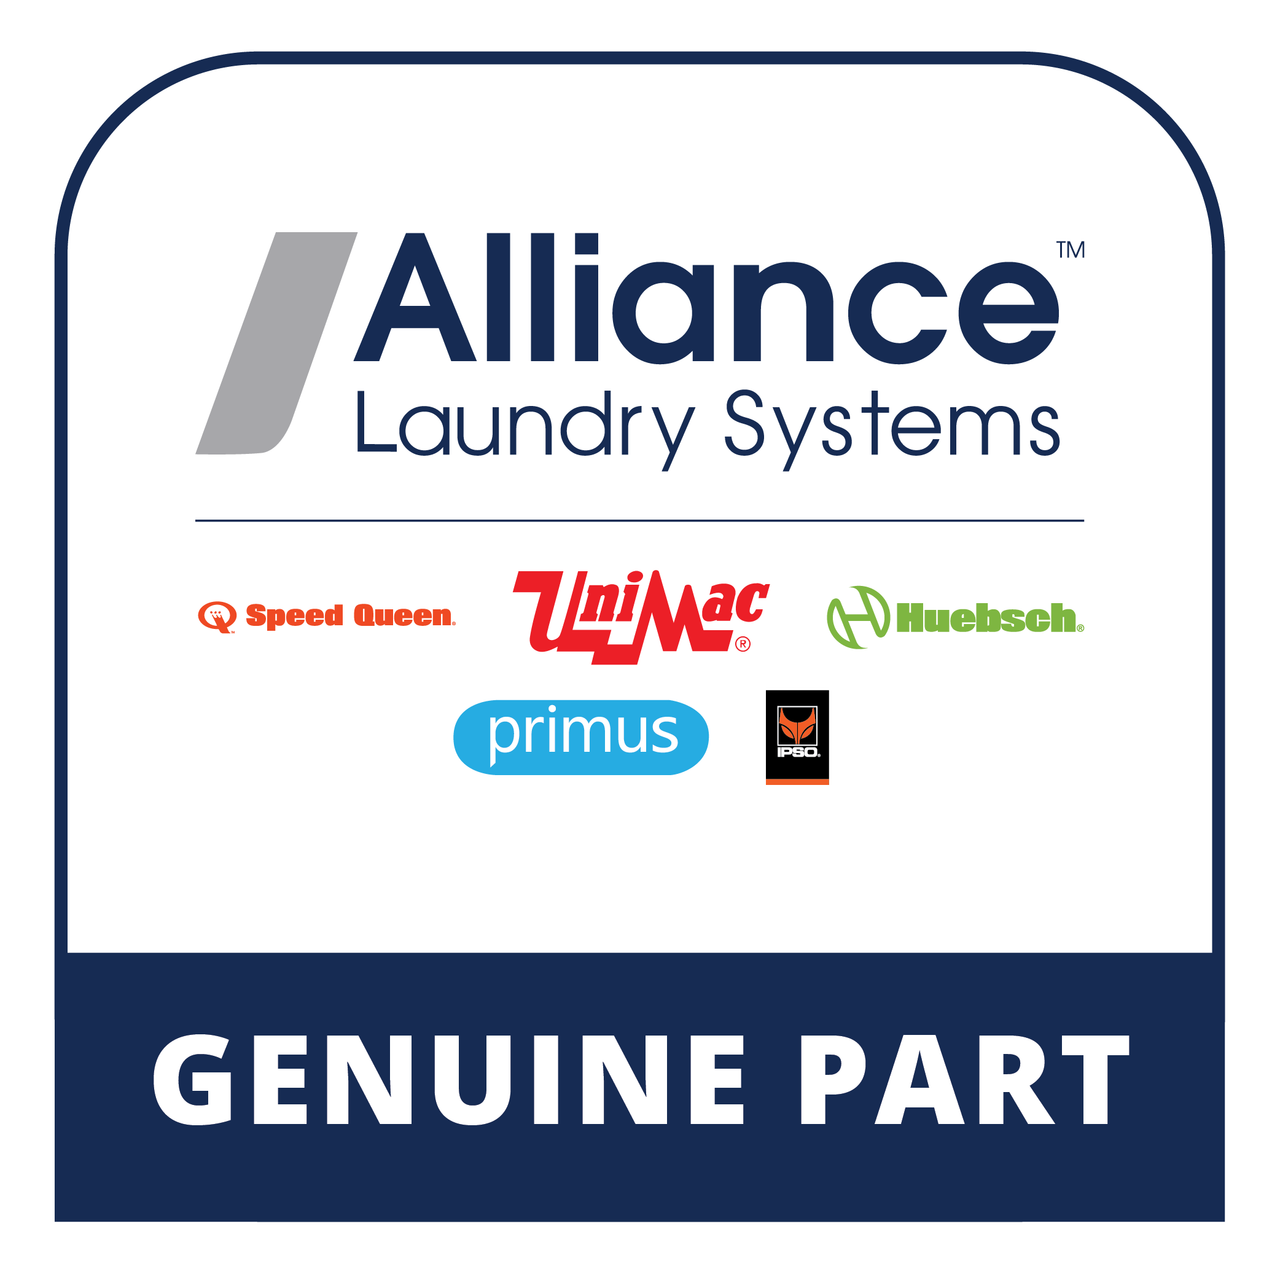 Alliance Laundry Systems 210131 - Overlay Hb Bl Cover - Genuine Alliance Laundry Systems Part